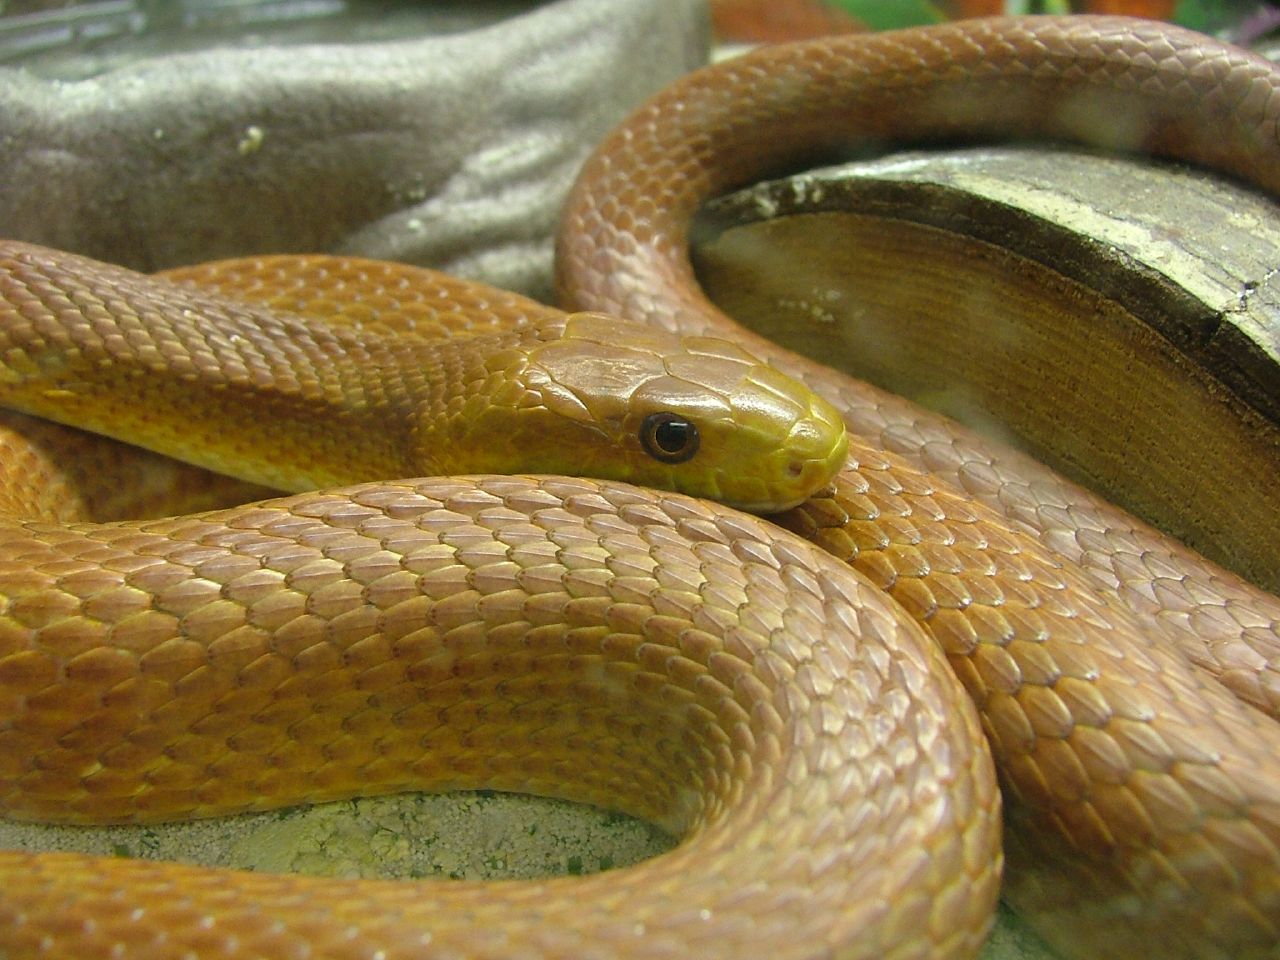 a brown snake with long, shiny stripes in its curled tail